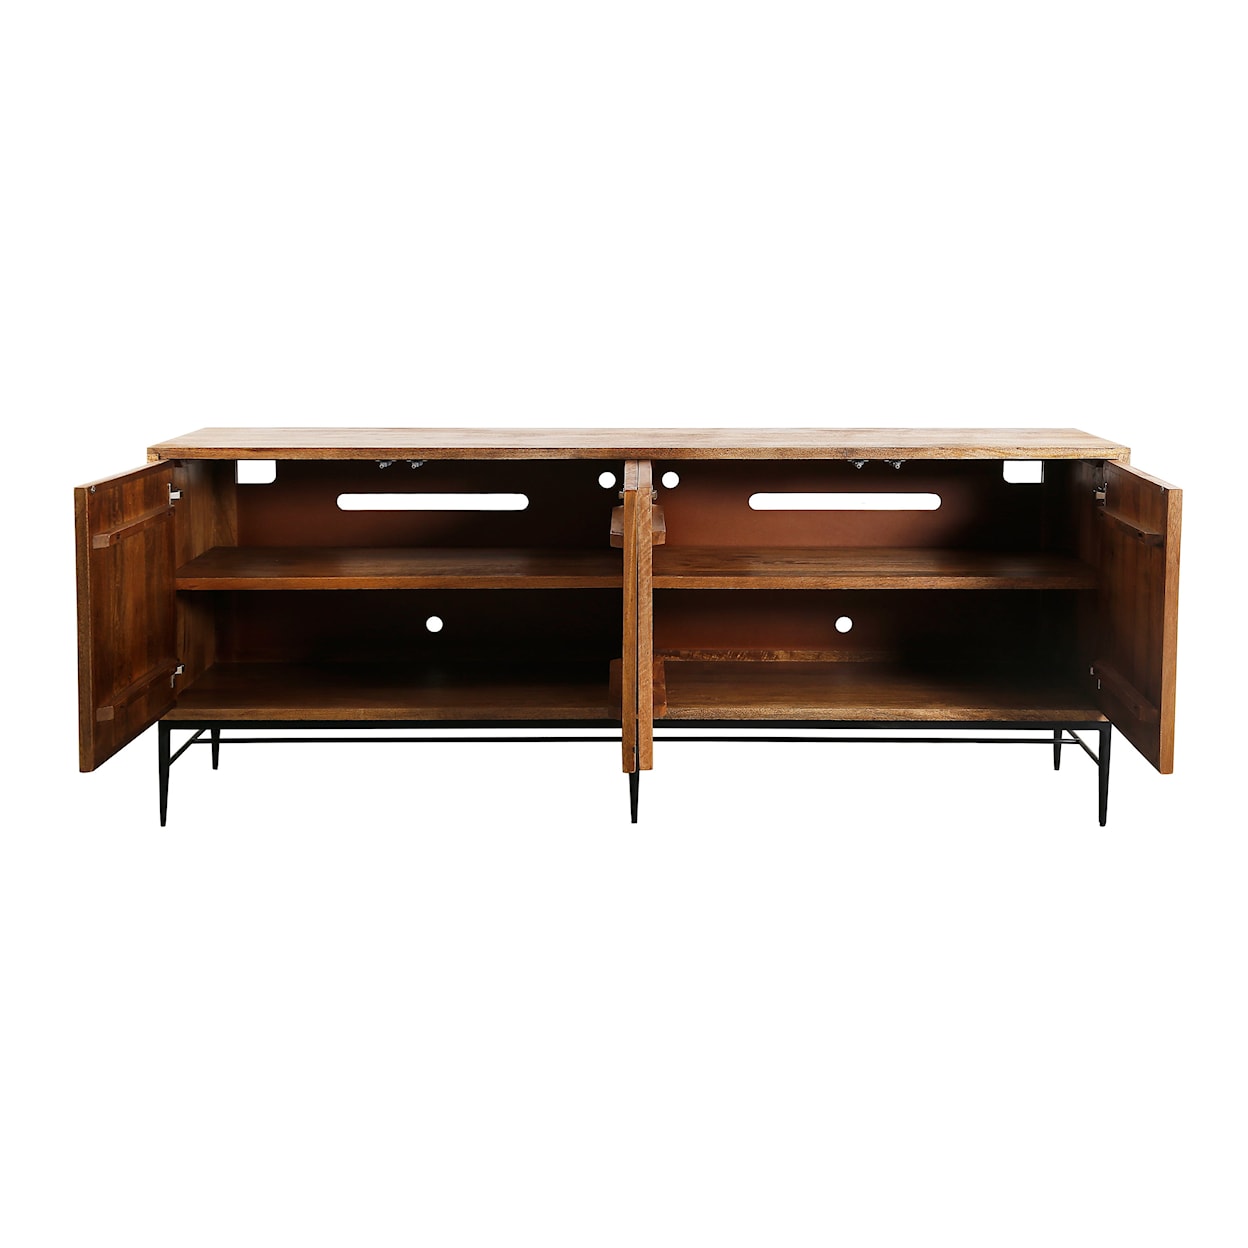 Paramount Furniture Crossings Love Console Table